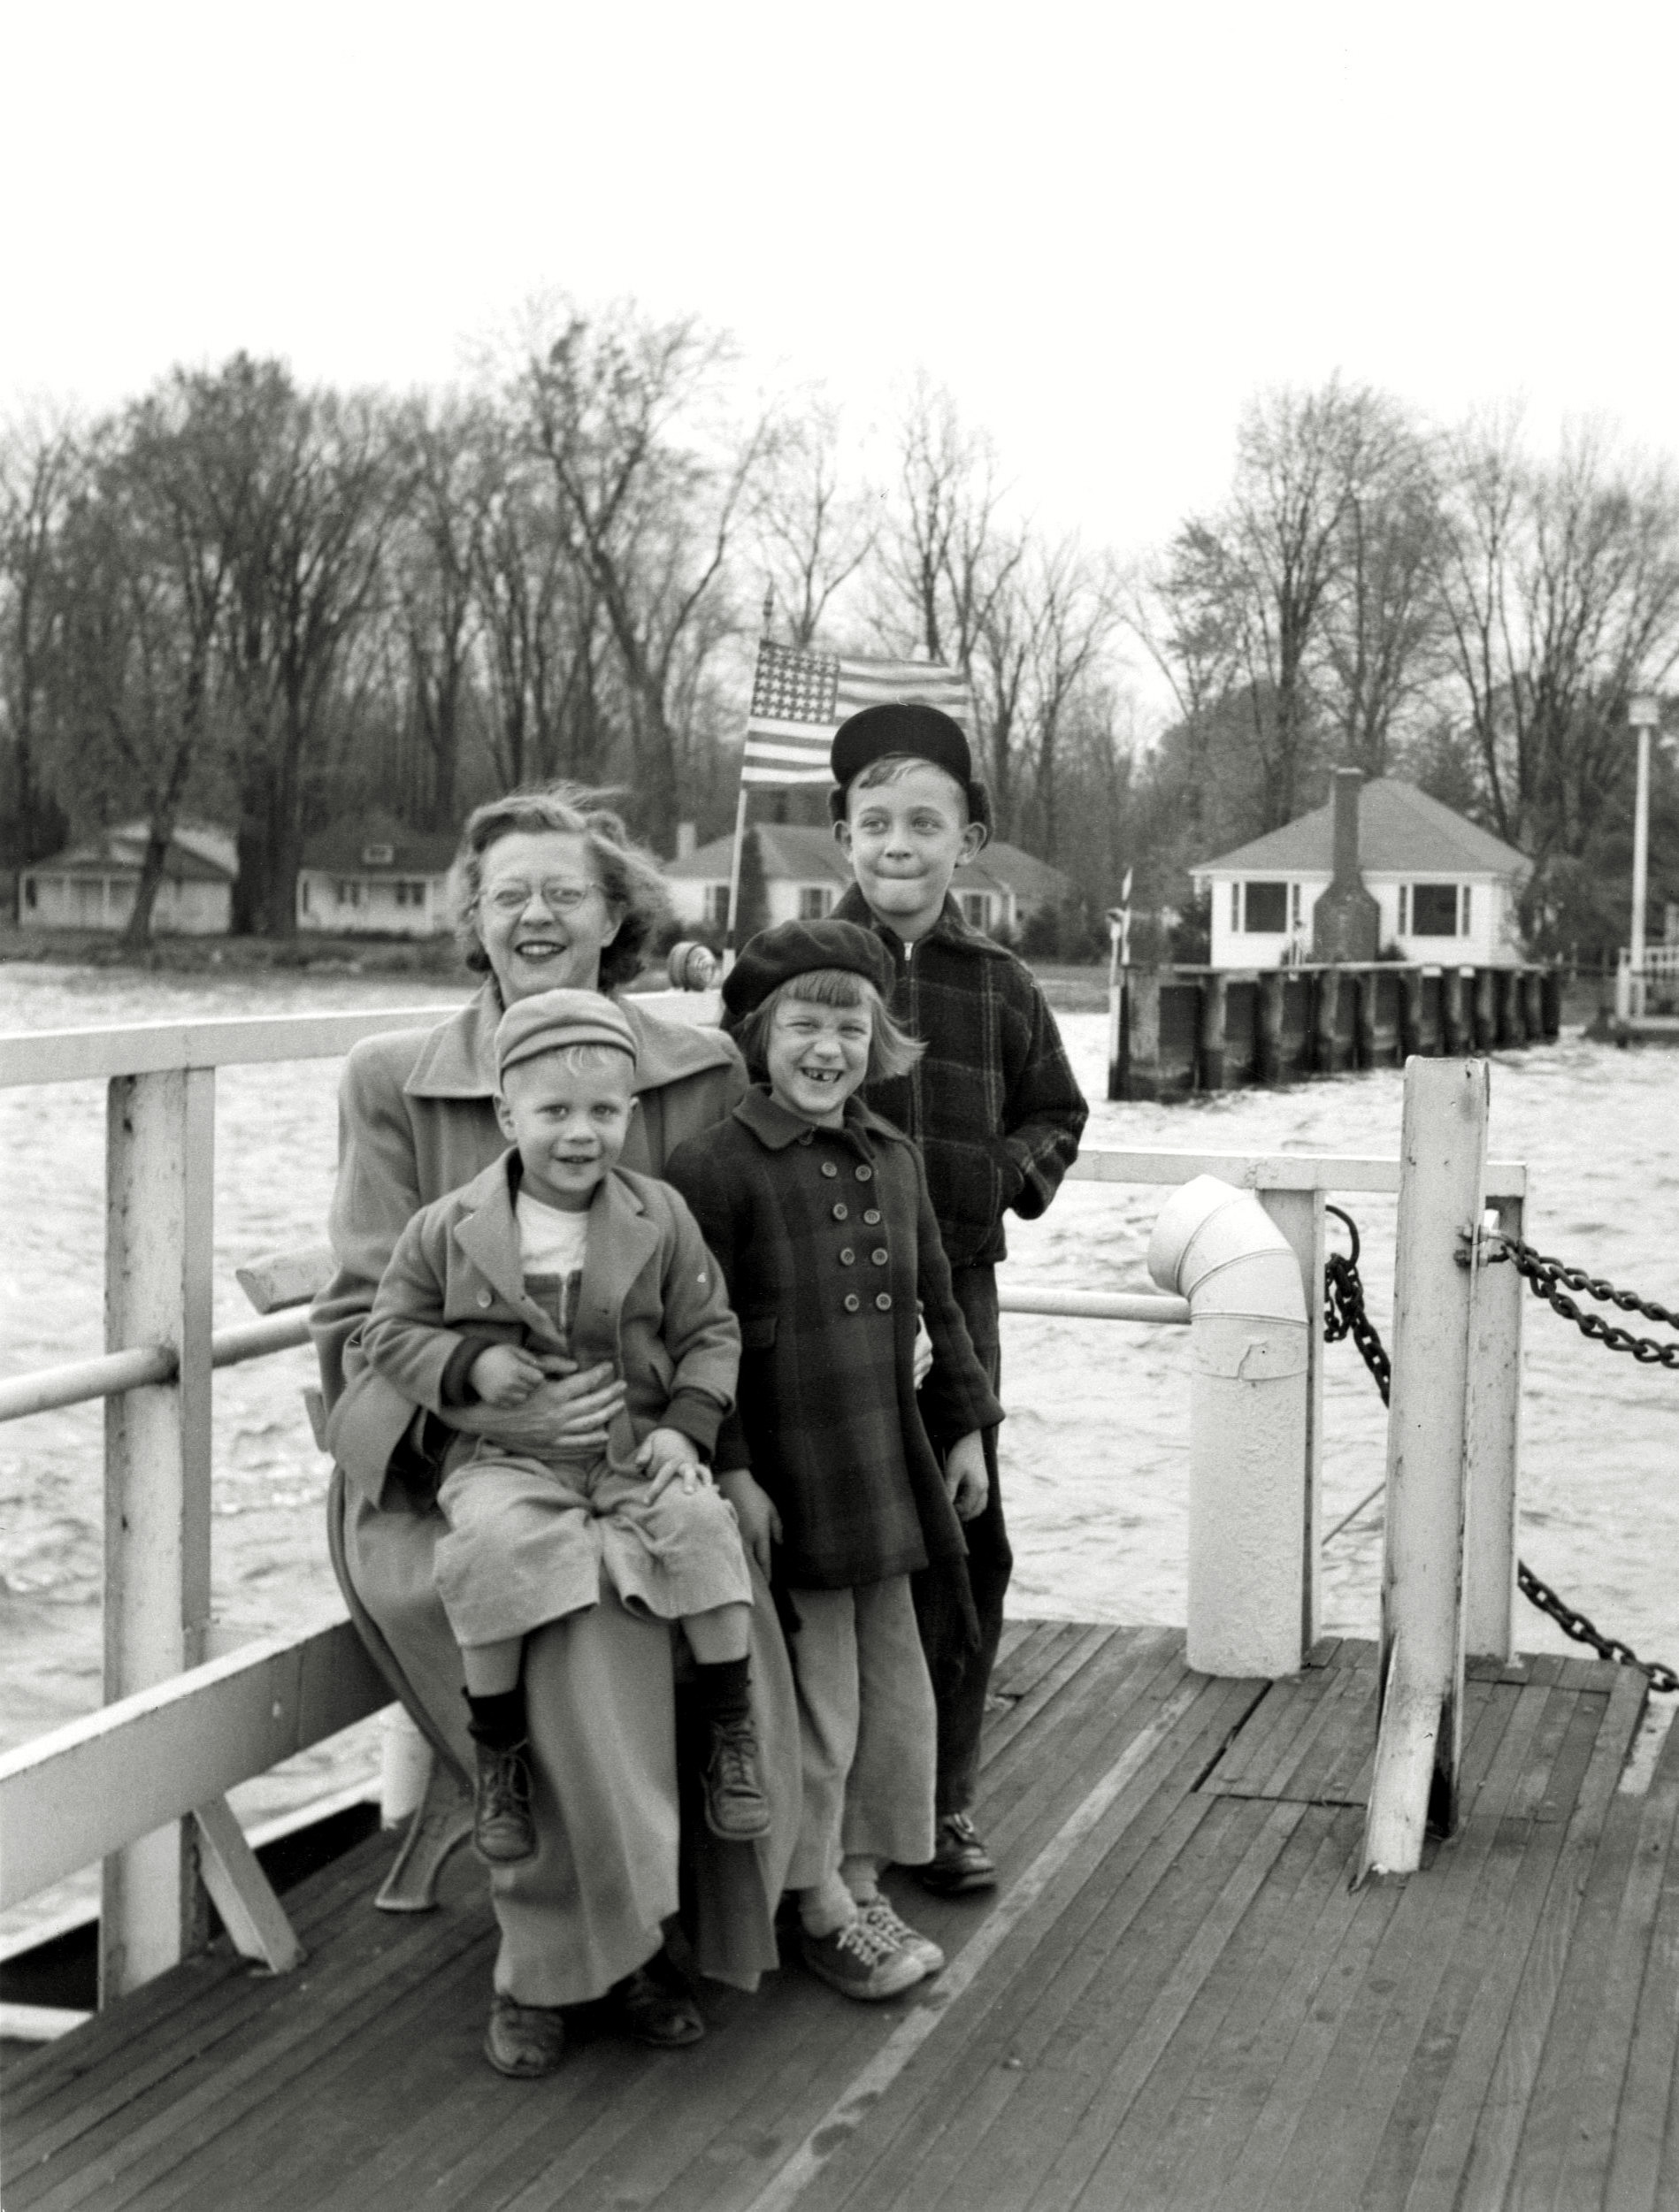 One of our annual trips from New Jersey to Florida circa 1951-52. This was pre-Interstate days and we traveled U.S. 17, 301 or sometimes A1A. Not sure which ferry this is. With Mom, sister and older brother. View full size.